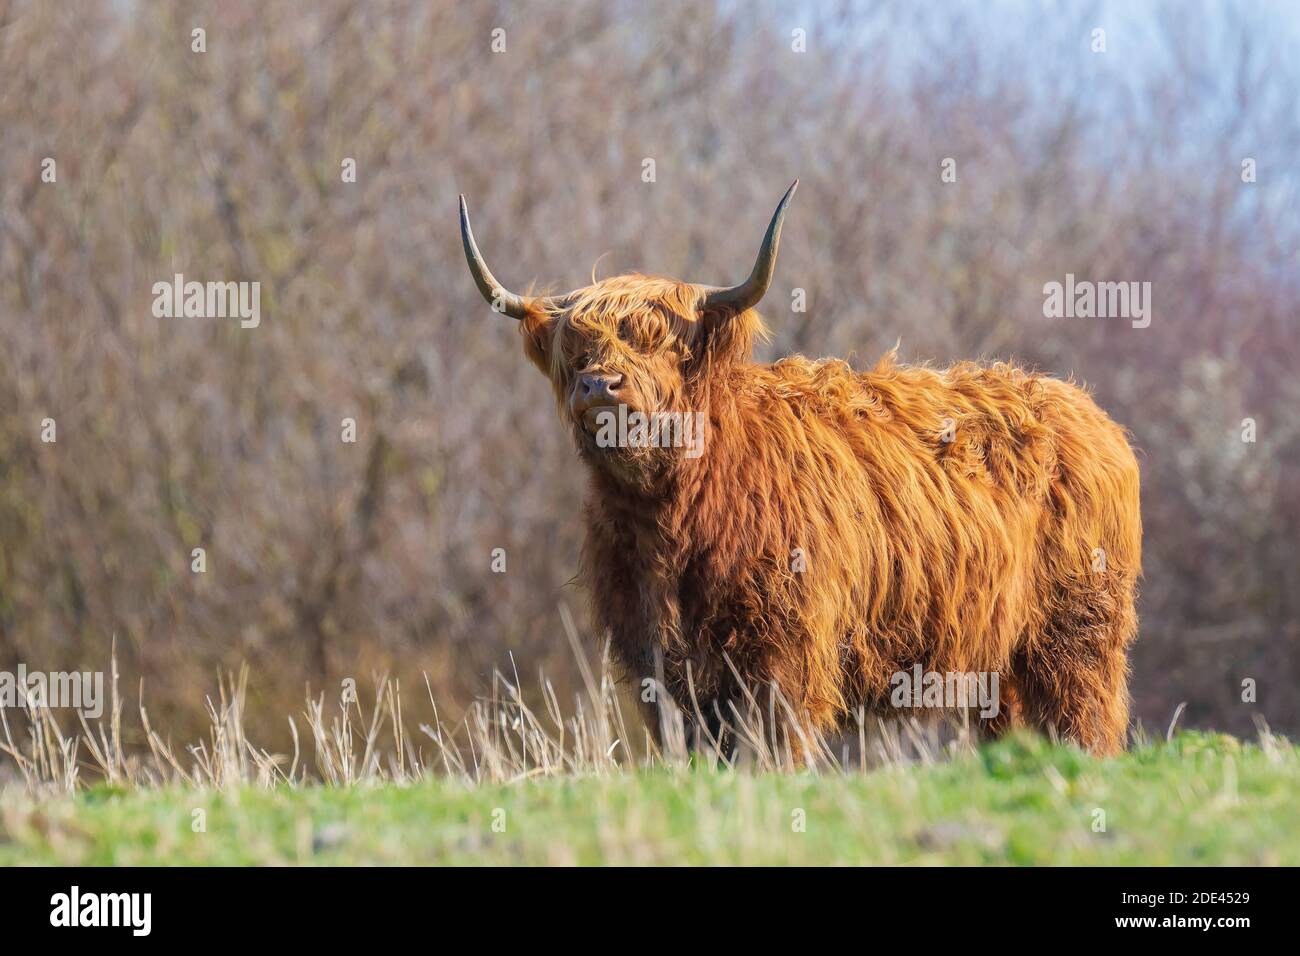 Closeup of brown red Highland cattle, Scottish cattle breed Bos taurus with long horns resting in grassland Stock Photo